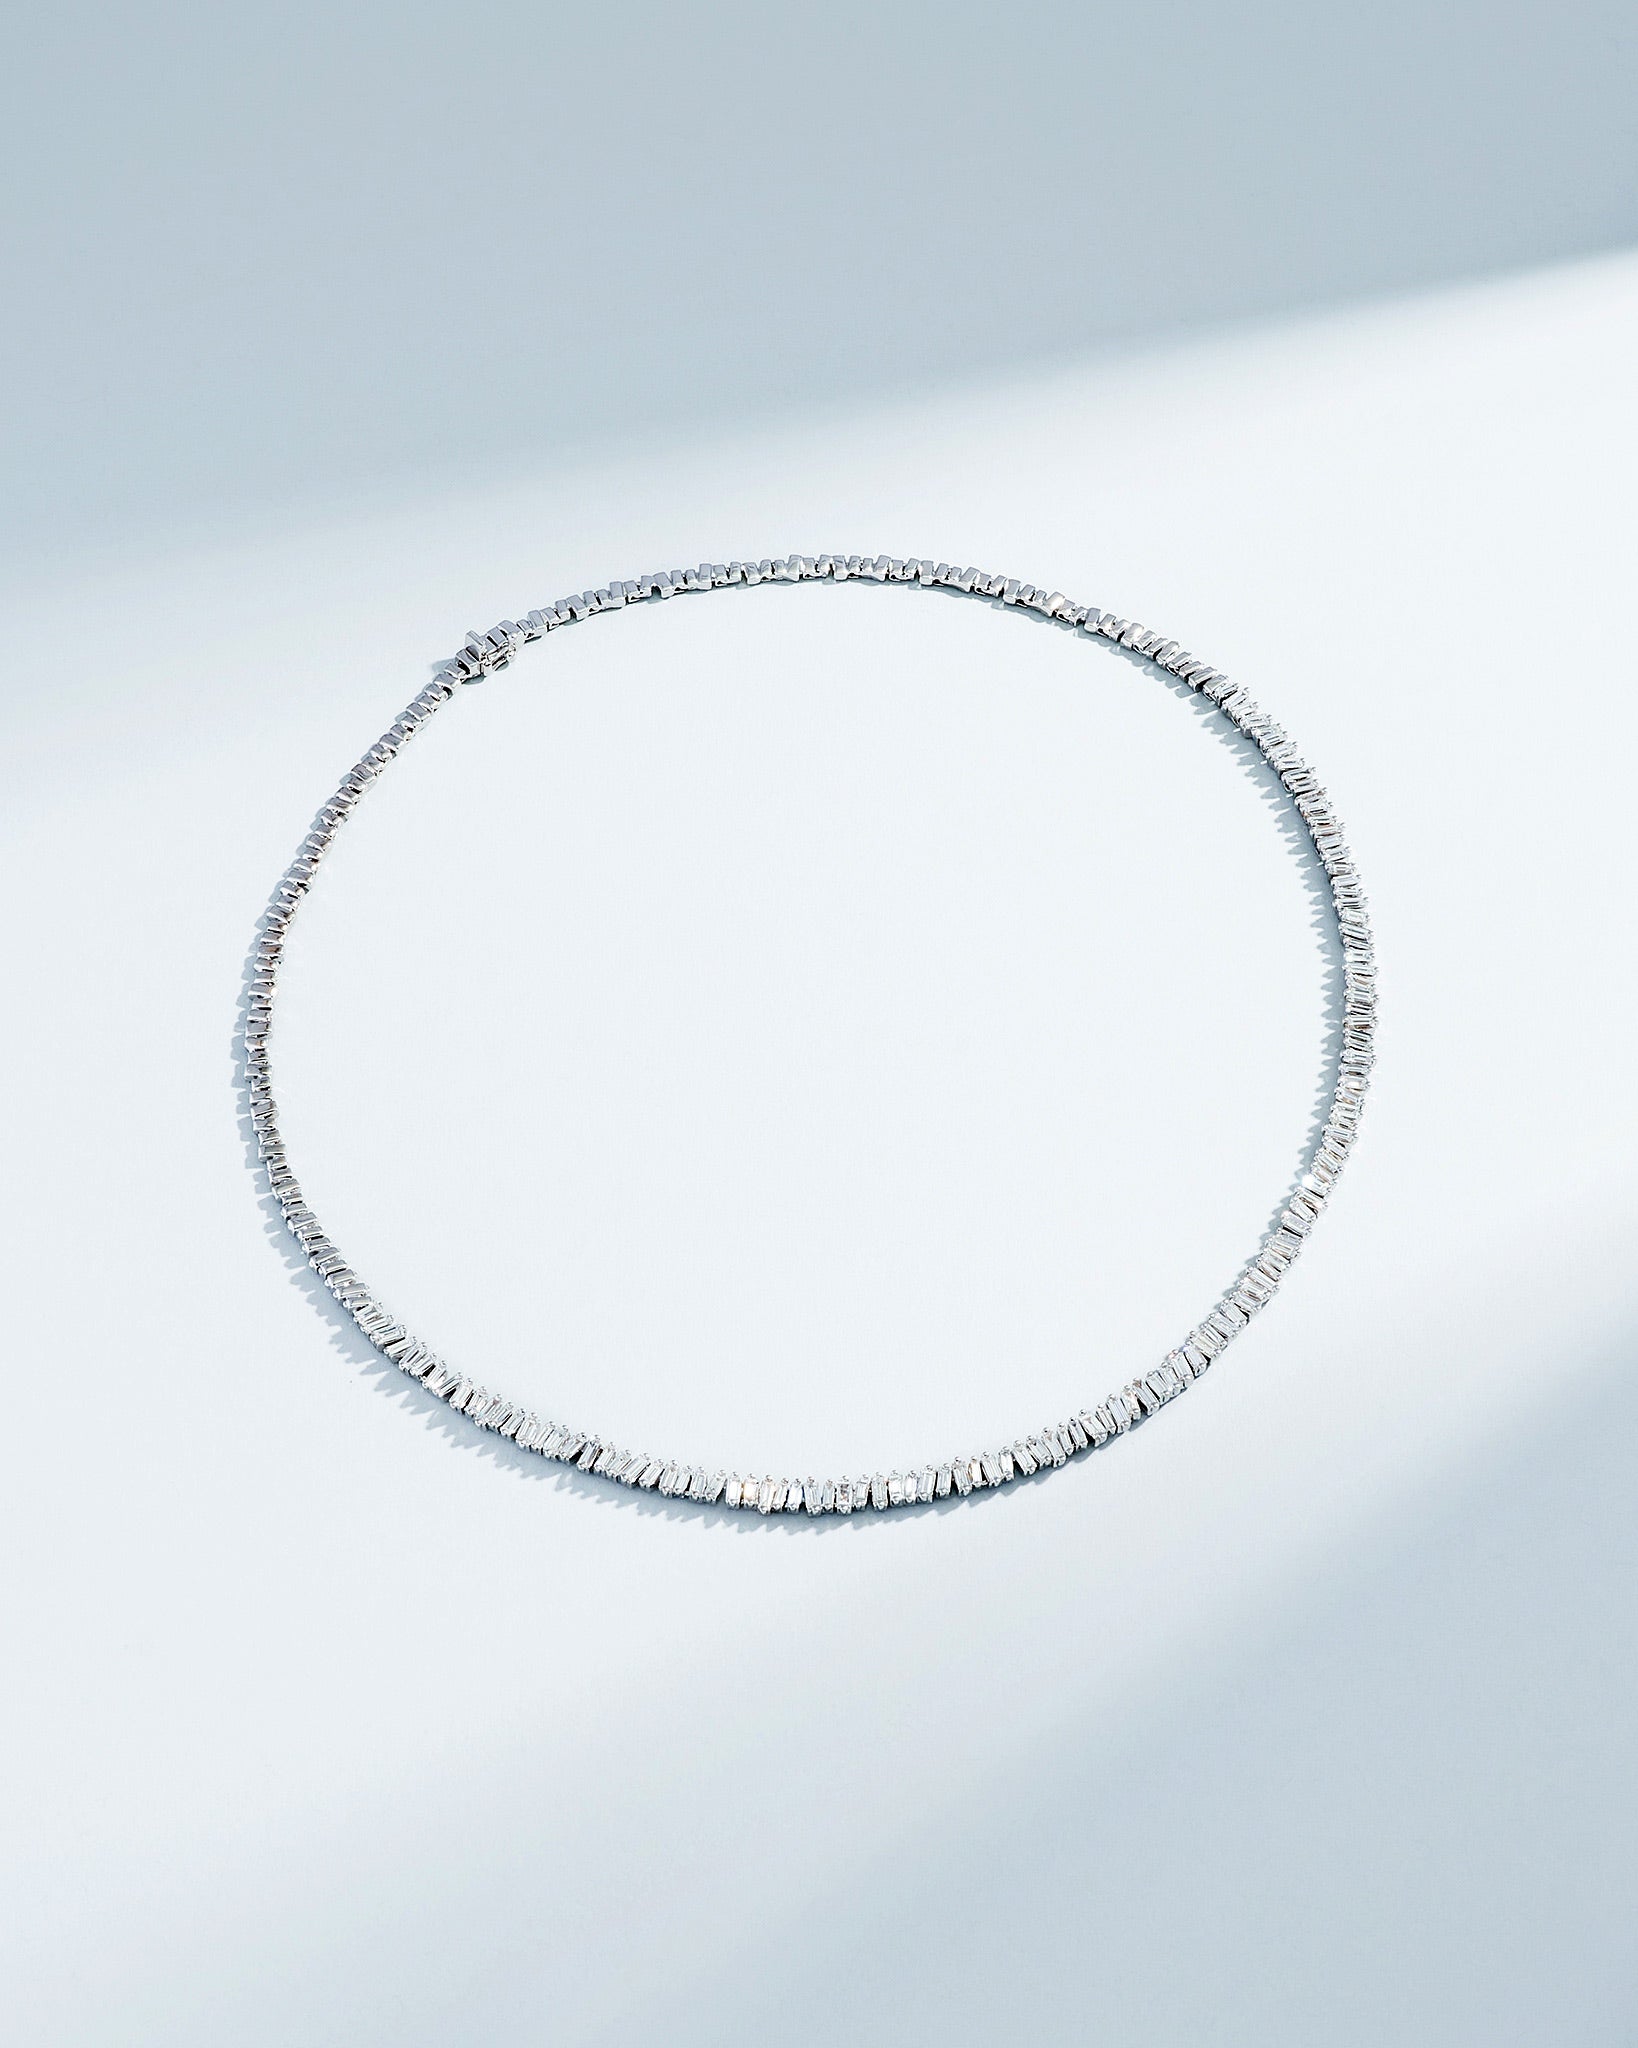 Suzanne Kalan Classic Diamond Tennis Necklace in 18k white gold